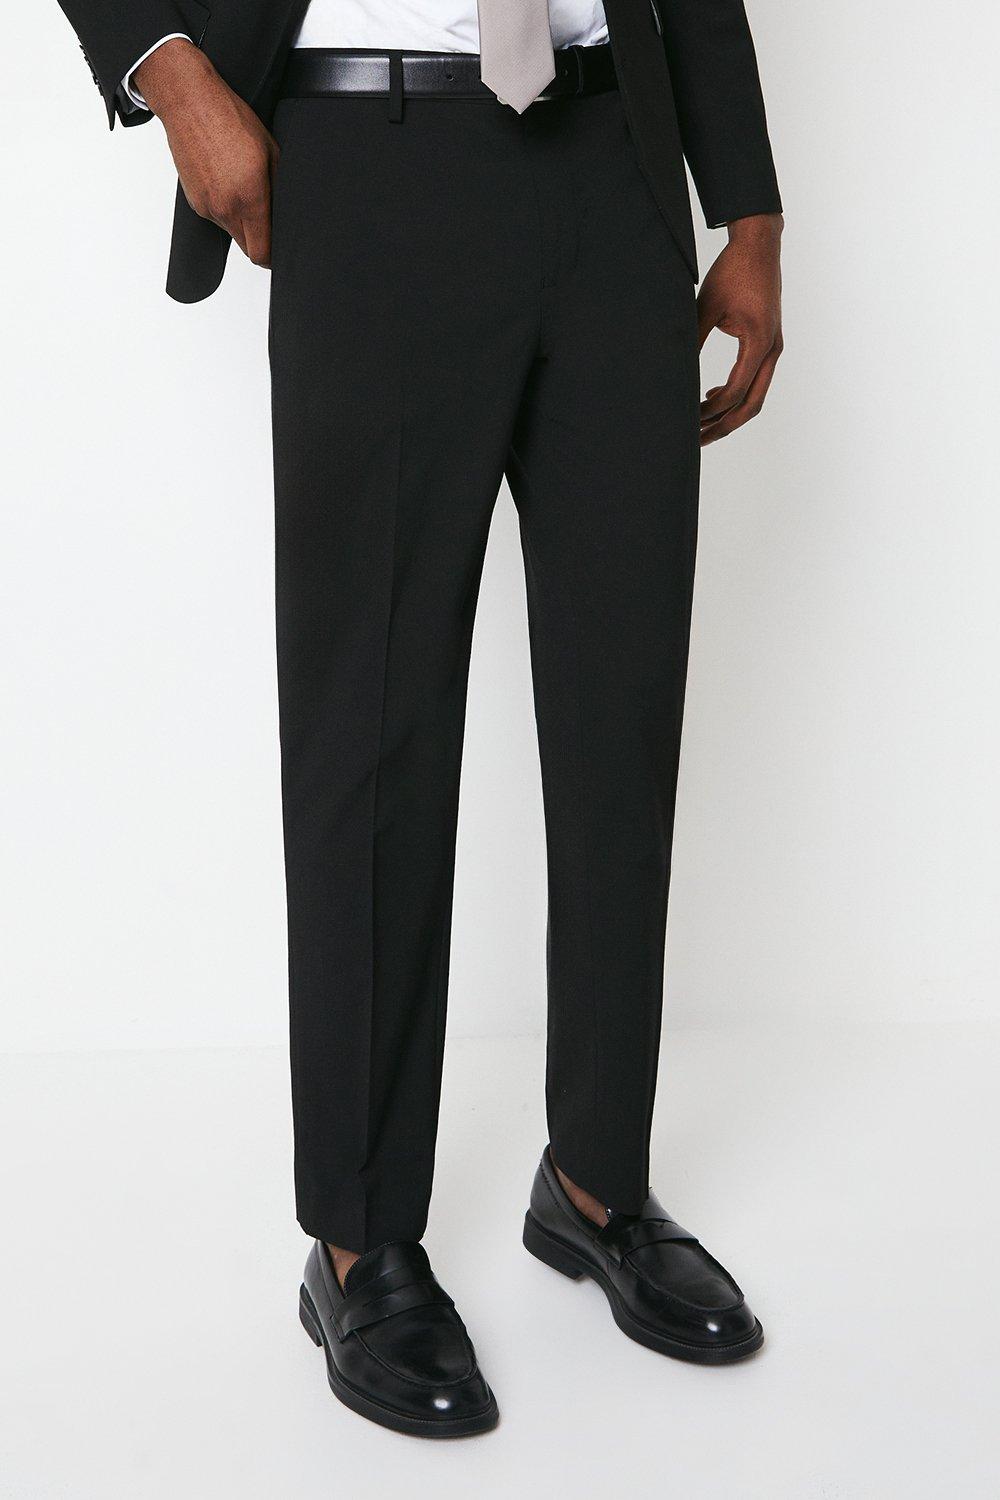 Mens Tailored Fit Black Essential Suit Trousers